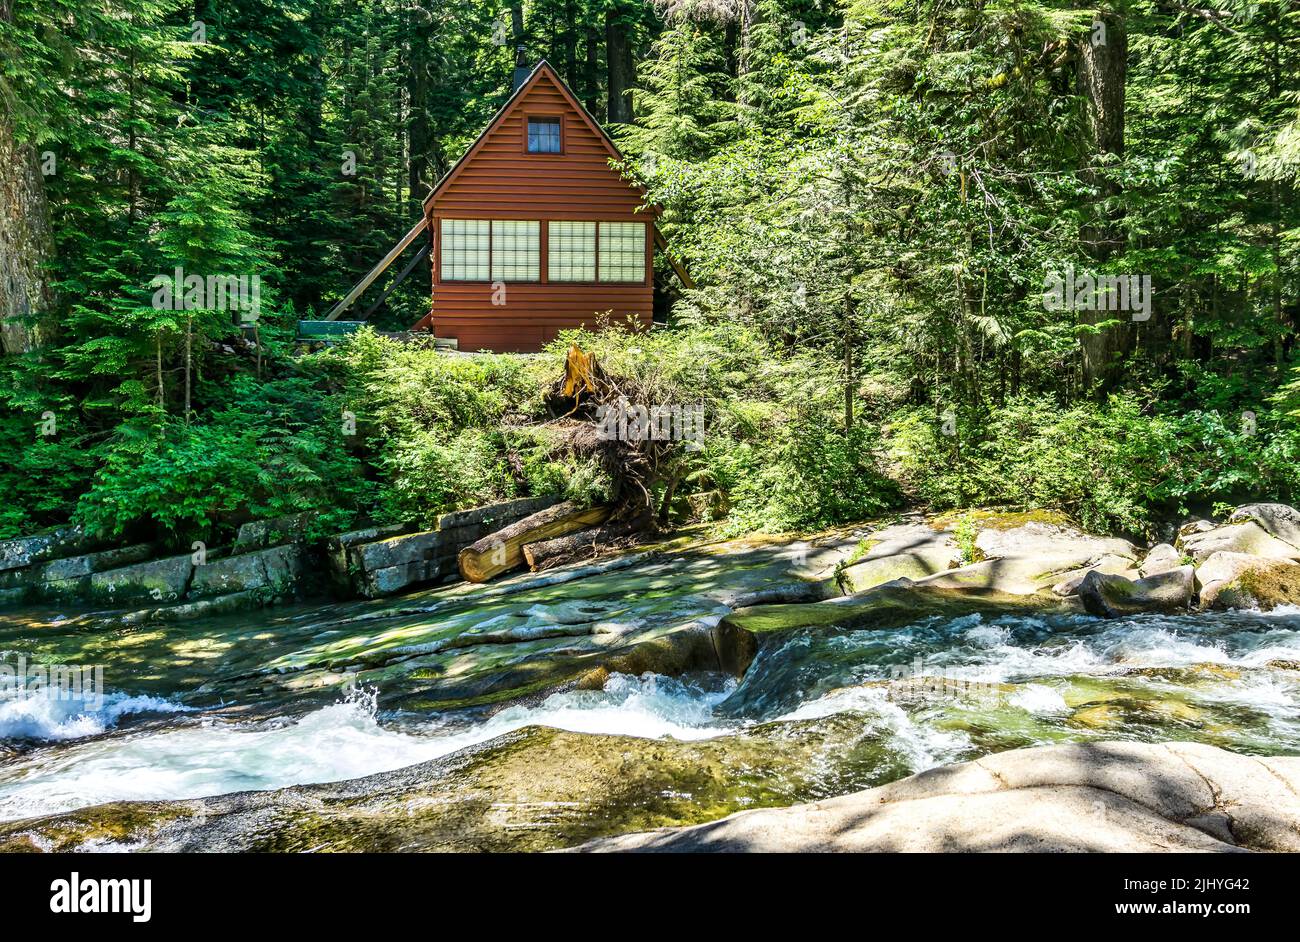 A view of an Aframe home at Denny Creek in Washington State. Stock Photo